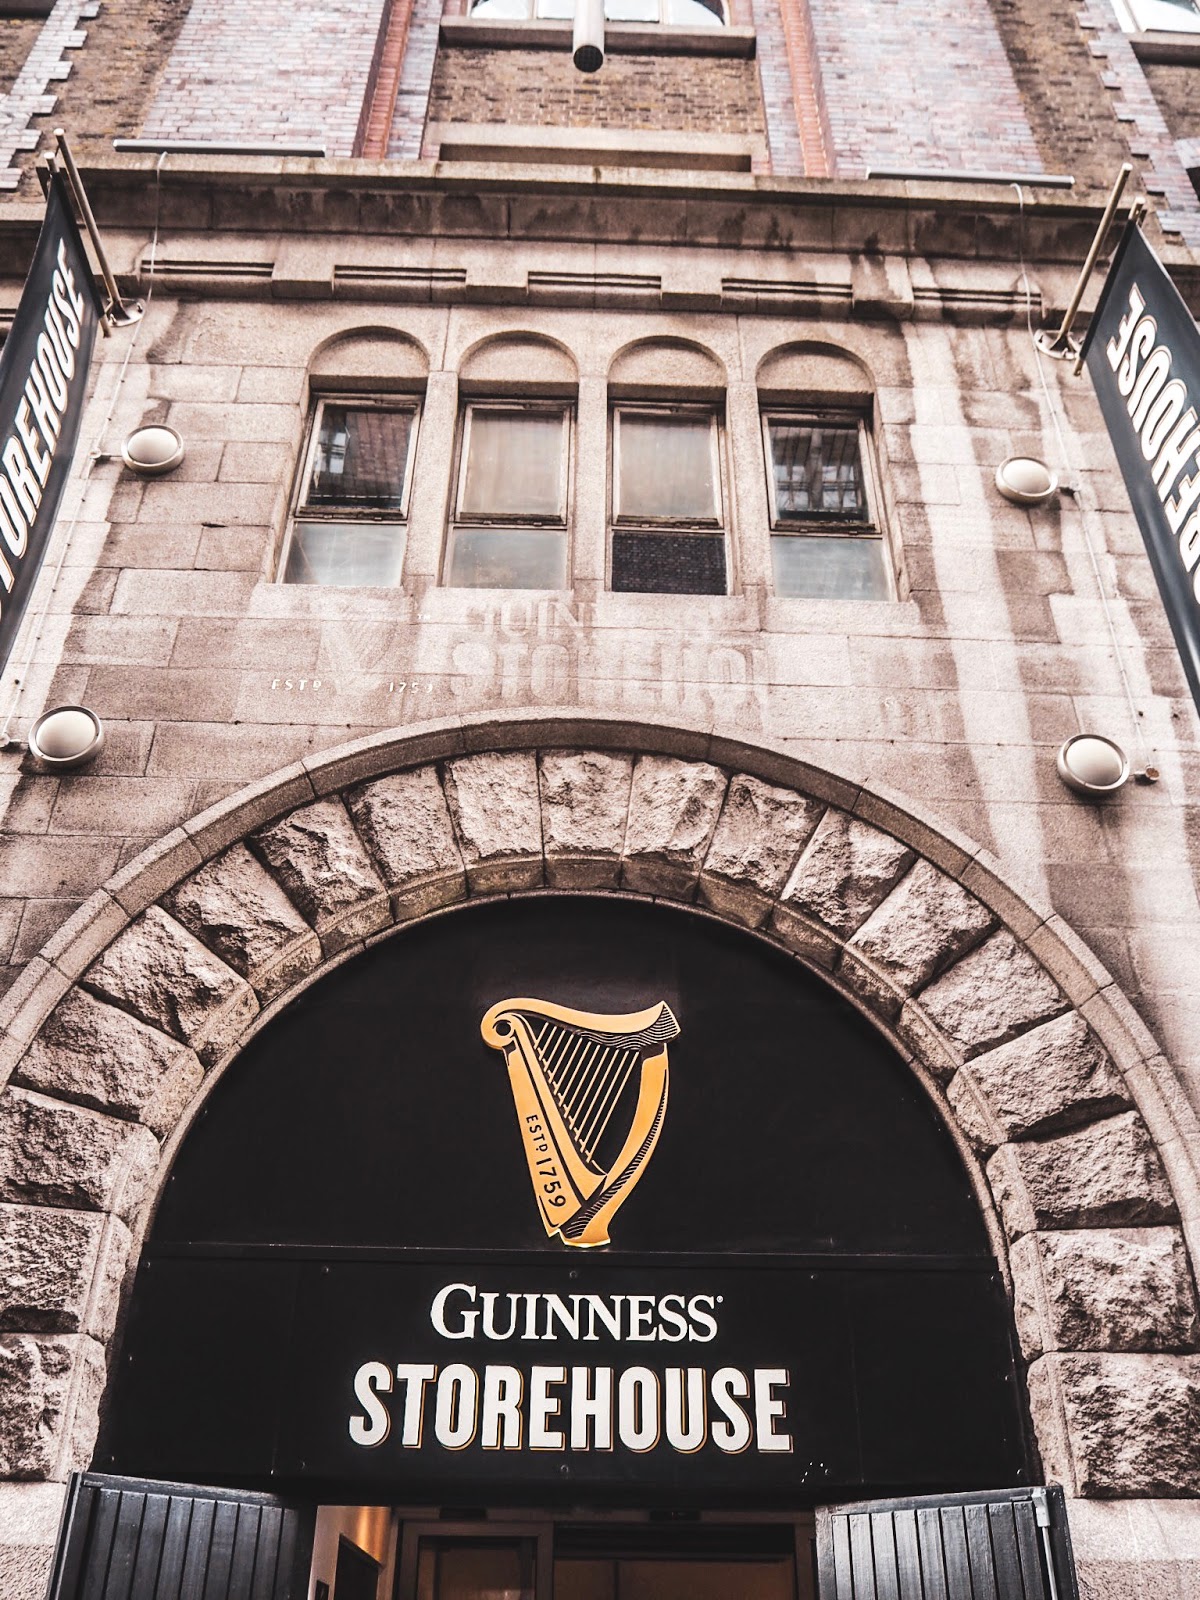 A shot of Guinness storehouse in sepia tone